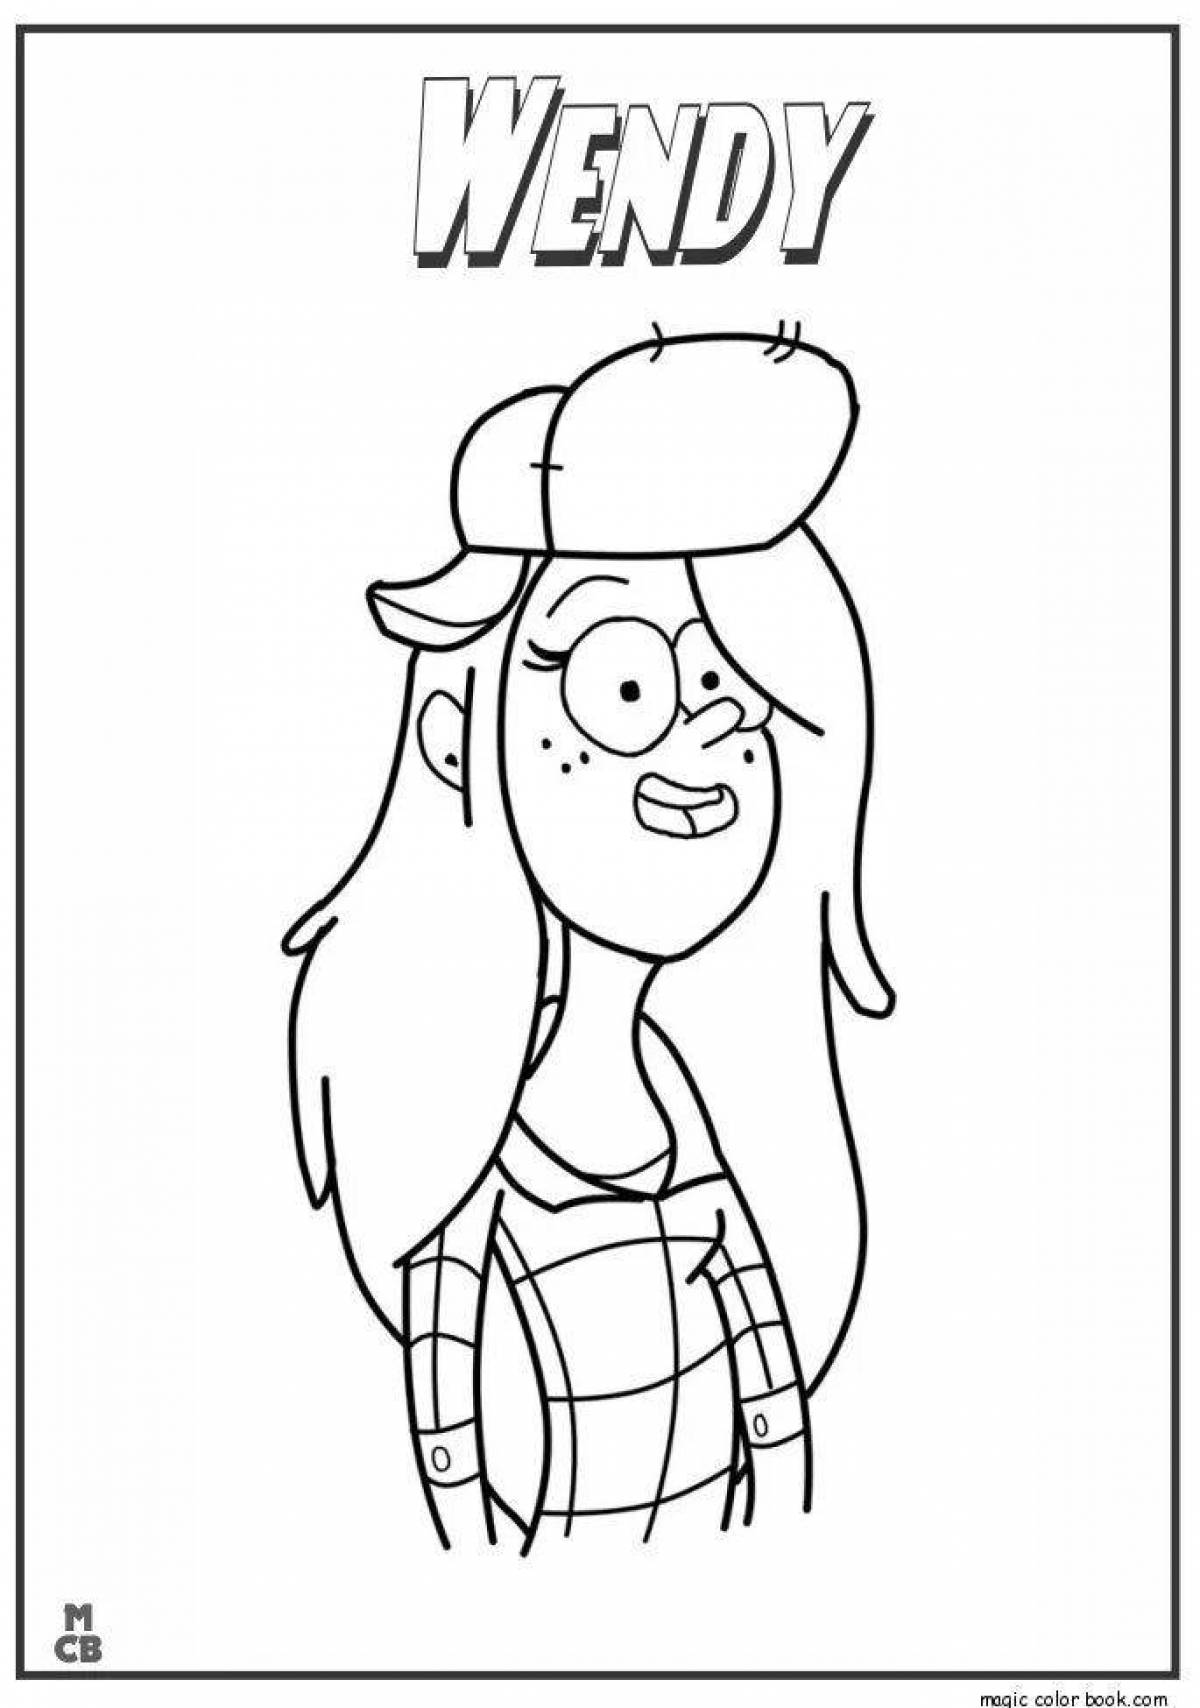 Coloring page enthusiastic wendy